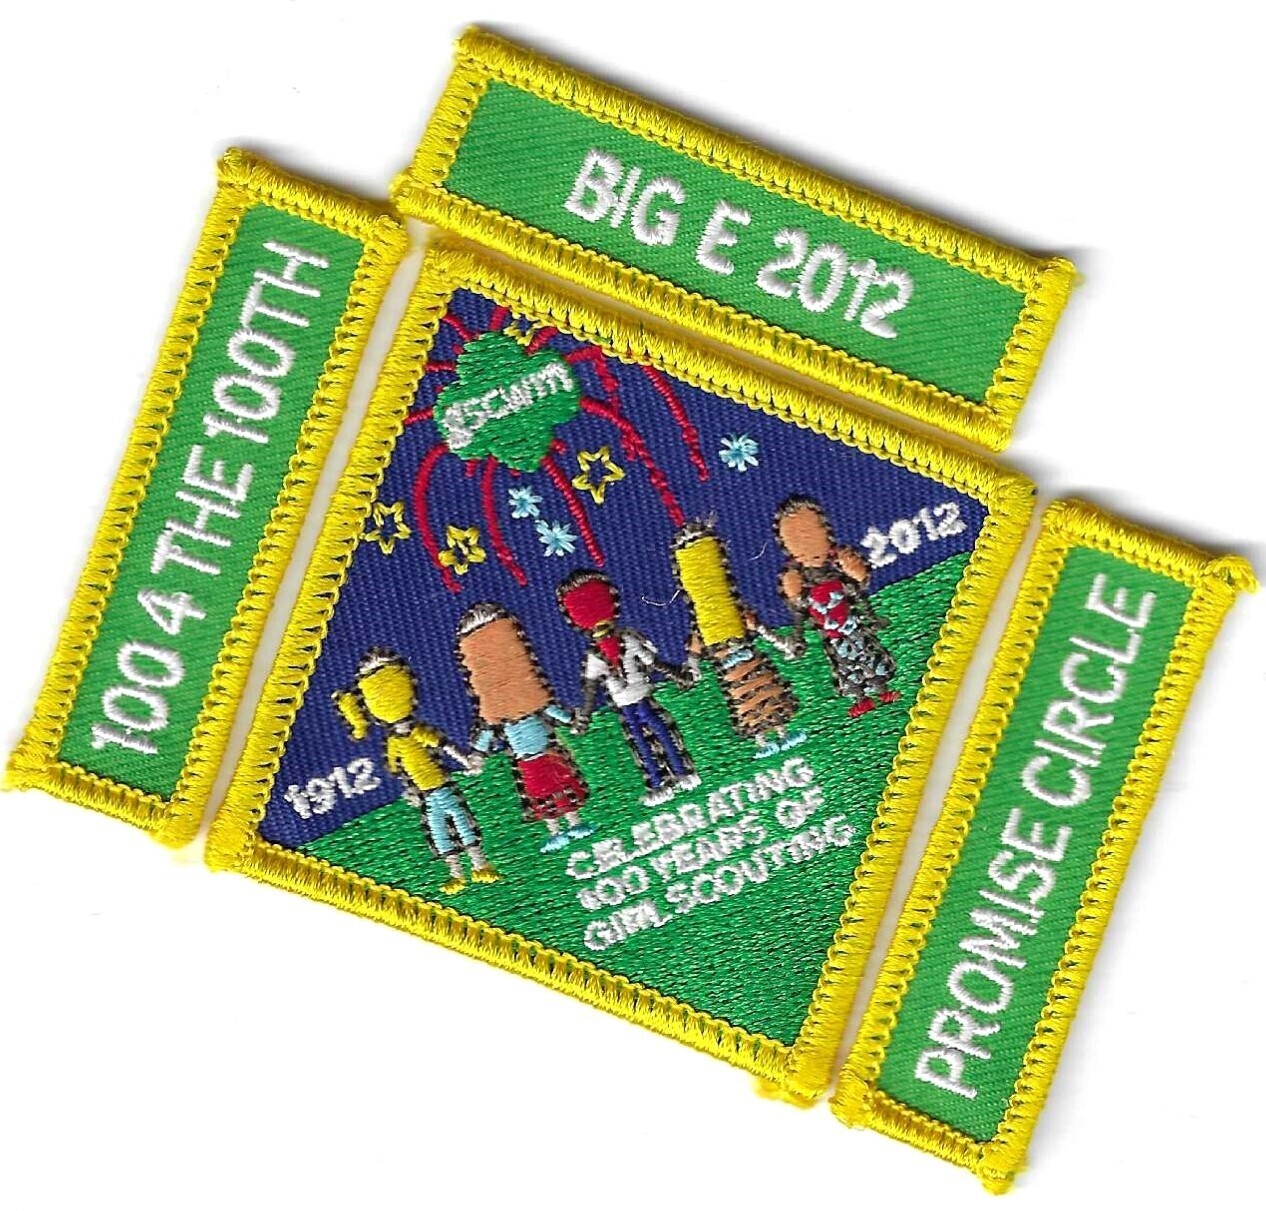 100th Anniversary Patch Set GSWM (have 3 of 4 rockers)